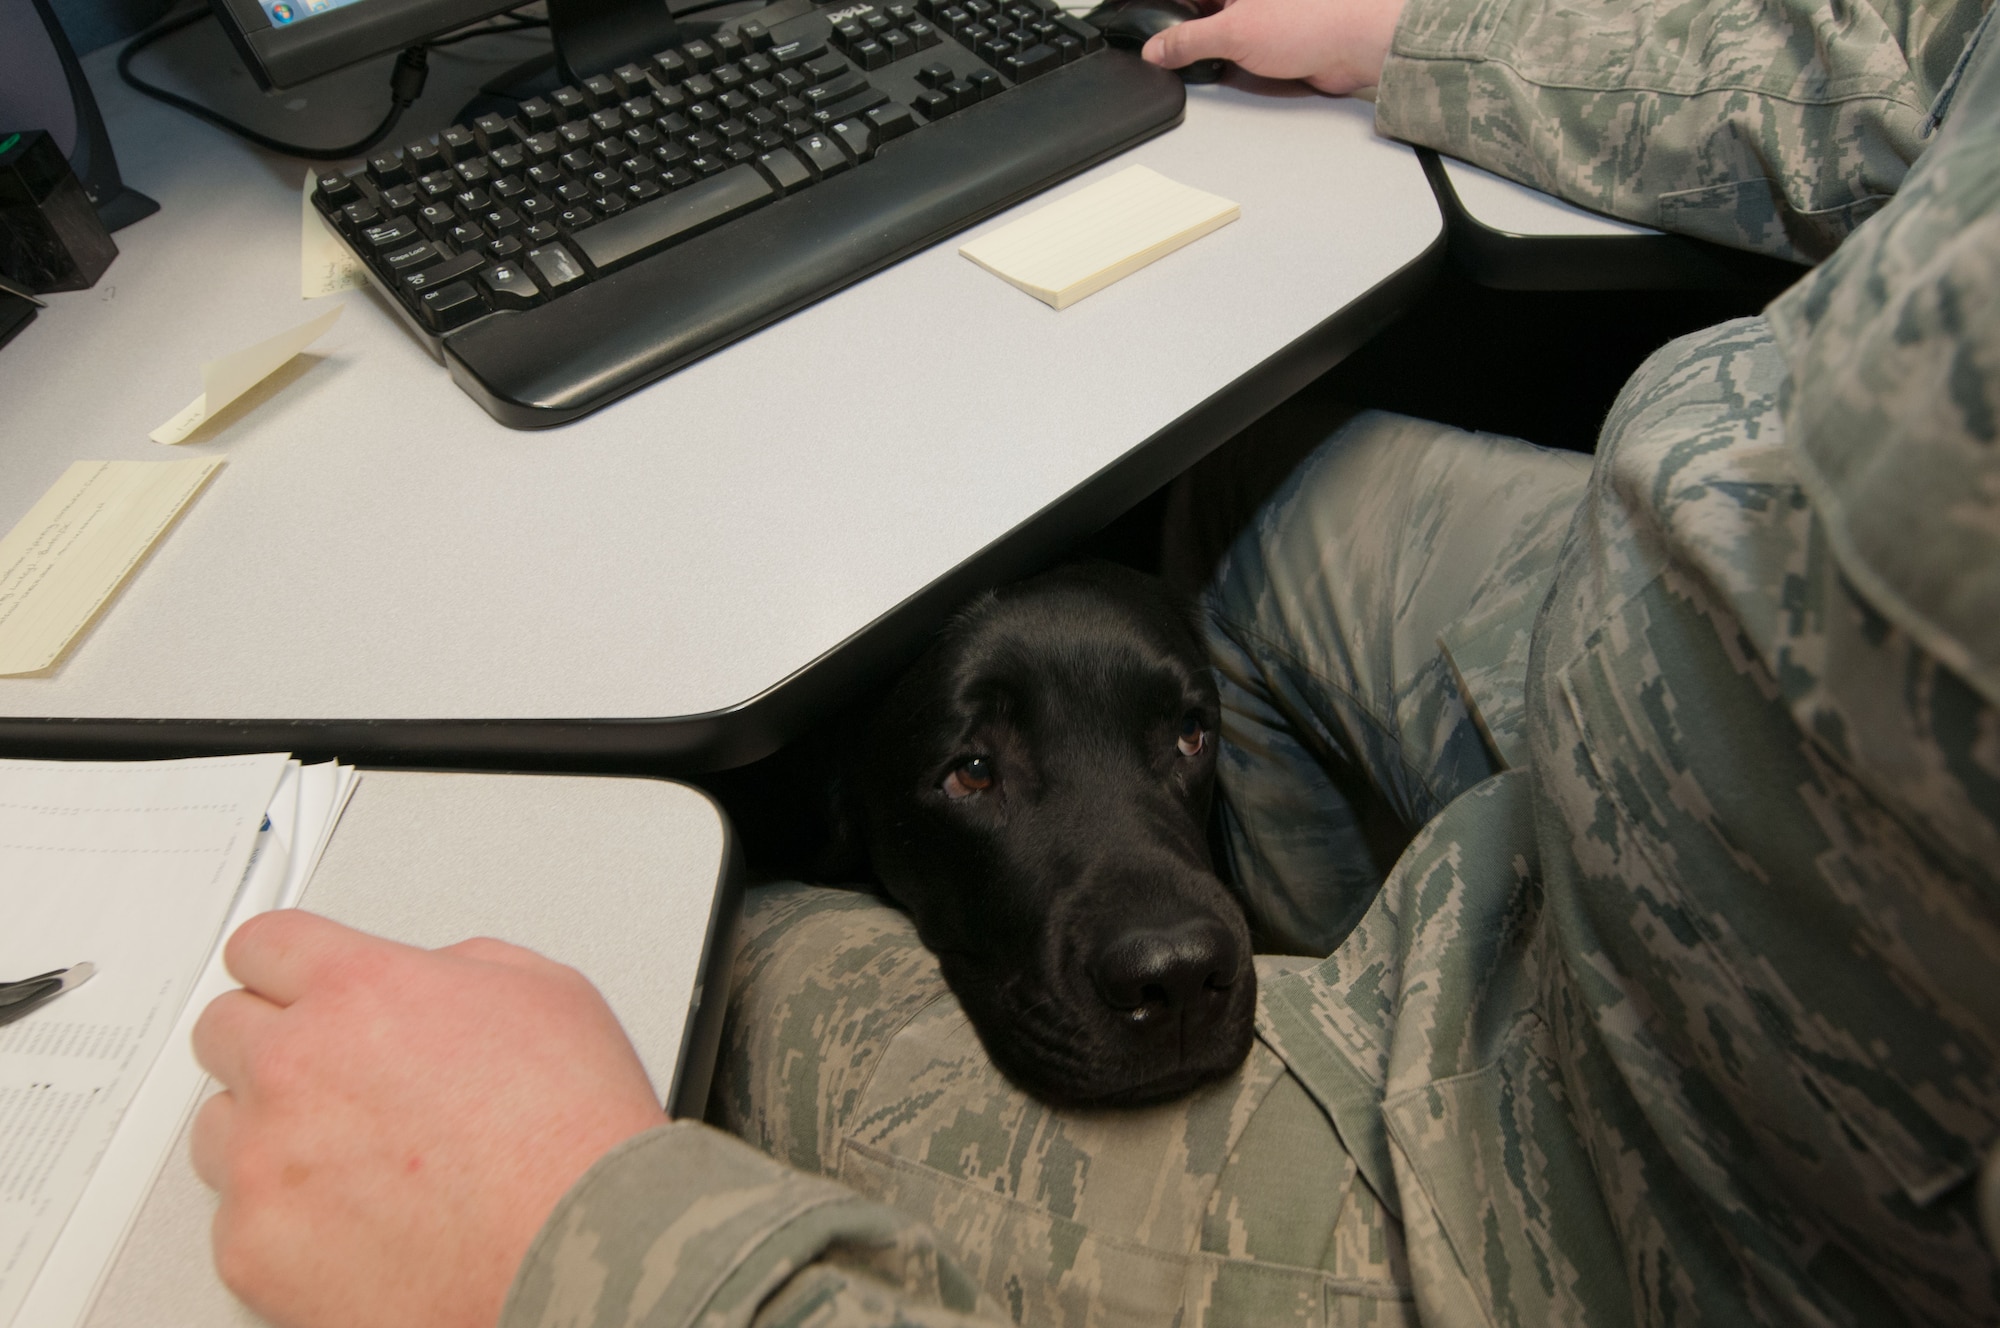 Luke, a service dog, rests his head on the lap of Staff Sgt. Ryan Garrison as he completes work at the Defense Courier Station-Baltimore on Fort Meade, Md., March 29, 2016. The Labrador goes everywhere with Garrison to assist in the Airman’s recovery from a combat-related injury. (U.S. Air Force photo/Sean Kimmons)